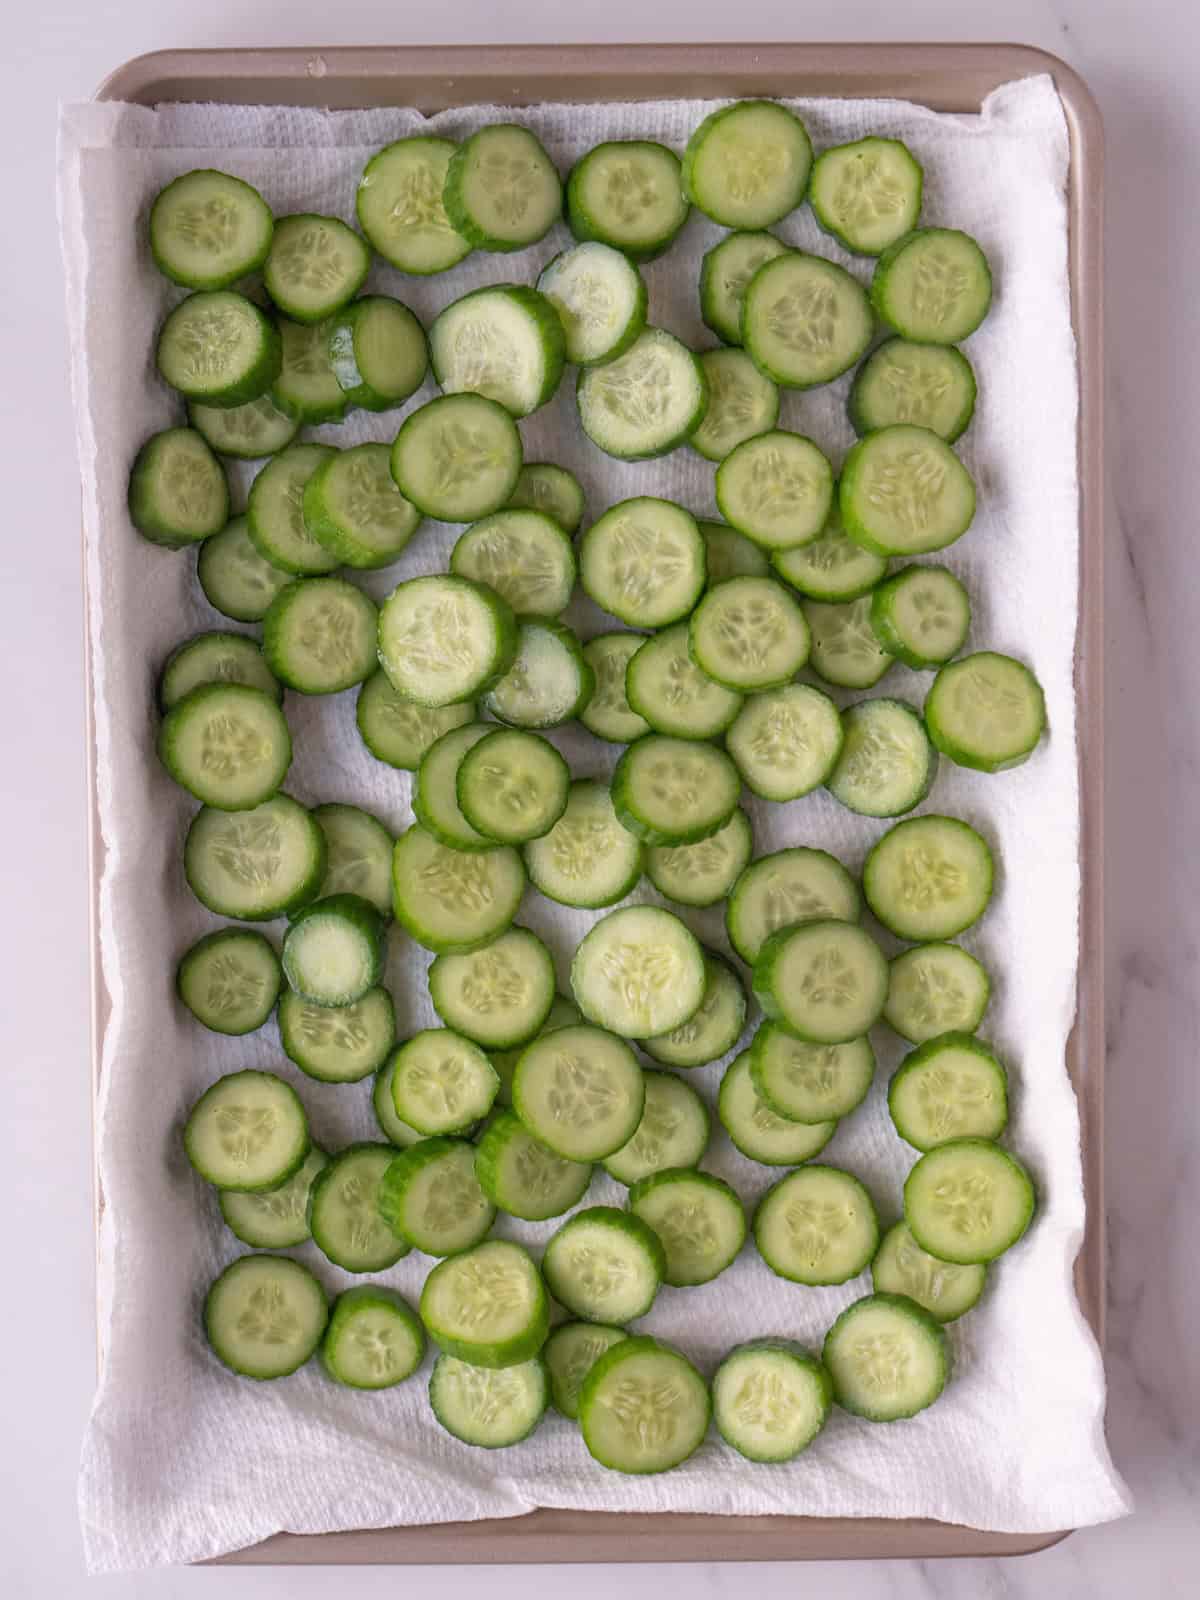 A baking sheet lined with paper towels with rinsed sliced cucumbers drying on it.